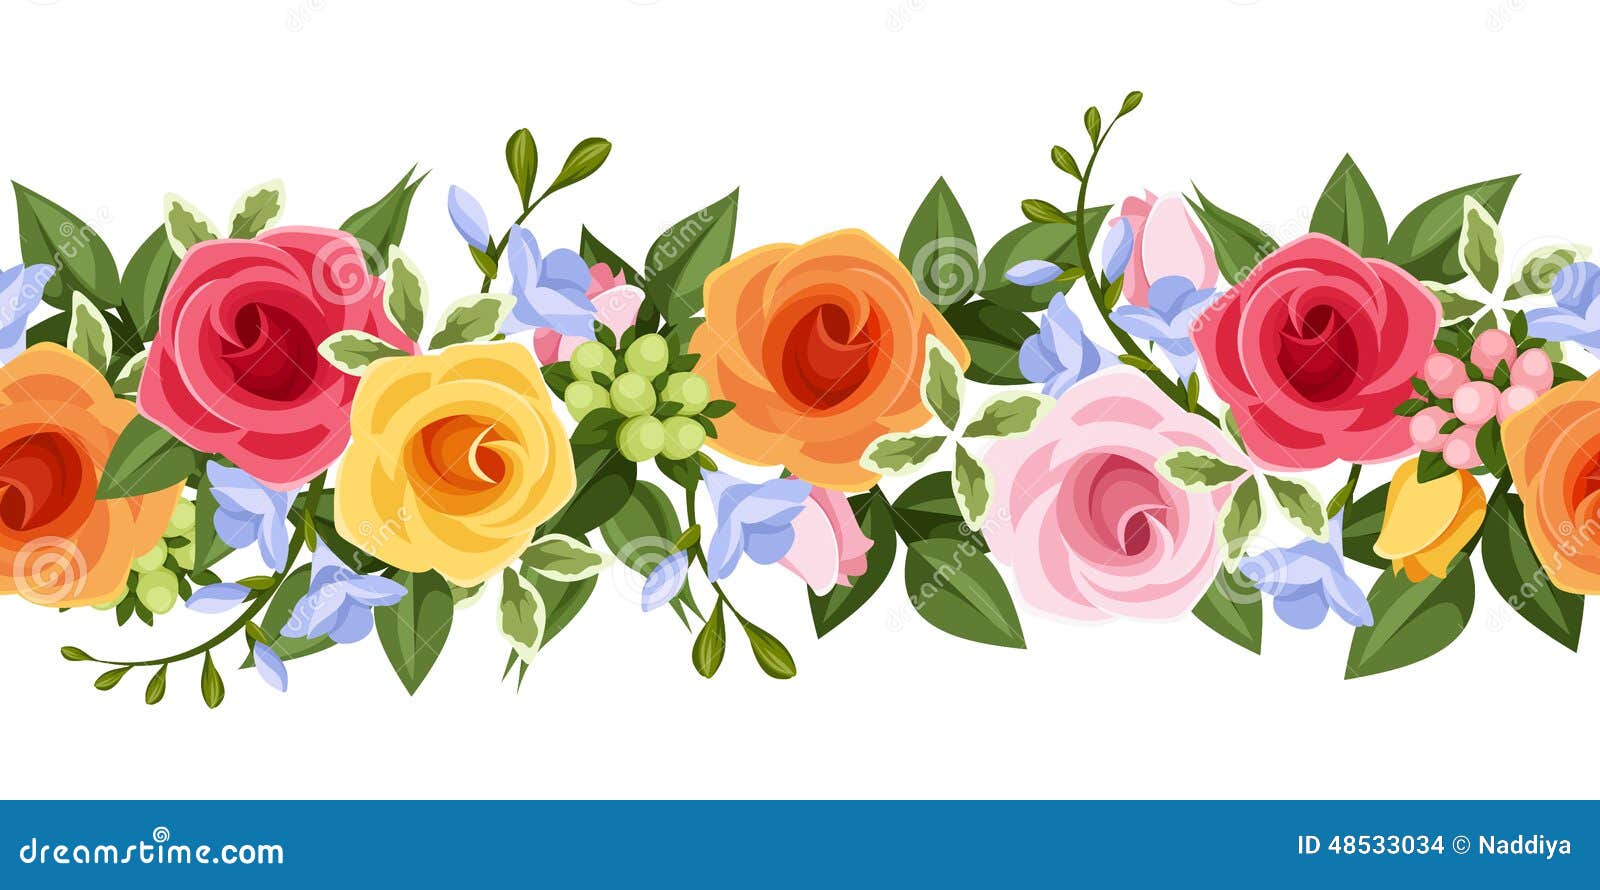 Horizontal Seamless Background with Colorful Roses and Freesia ...